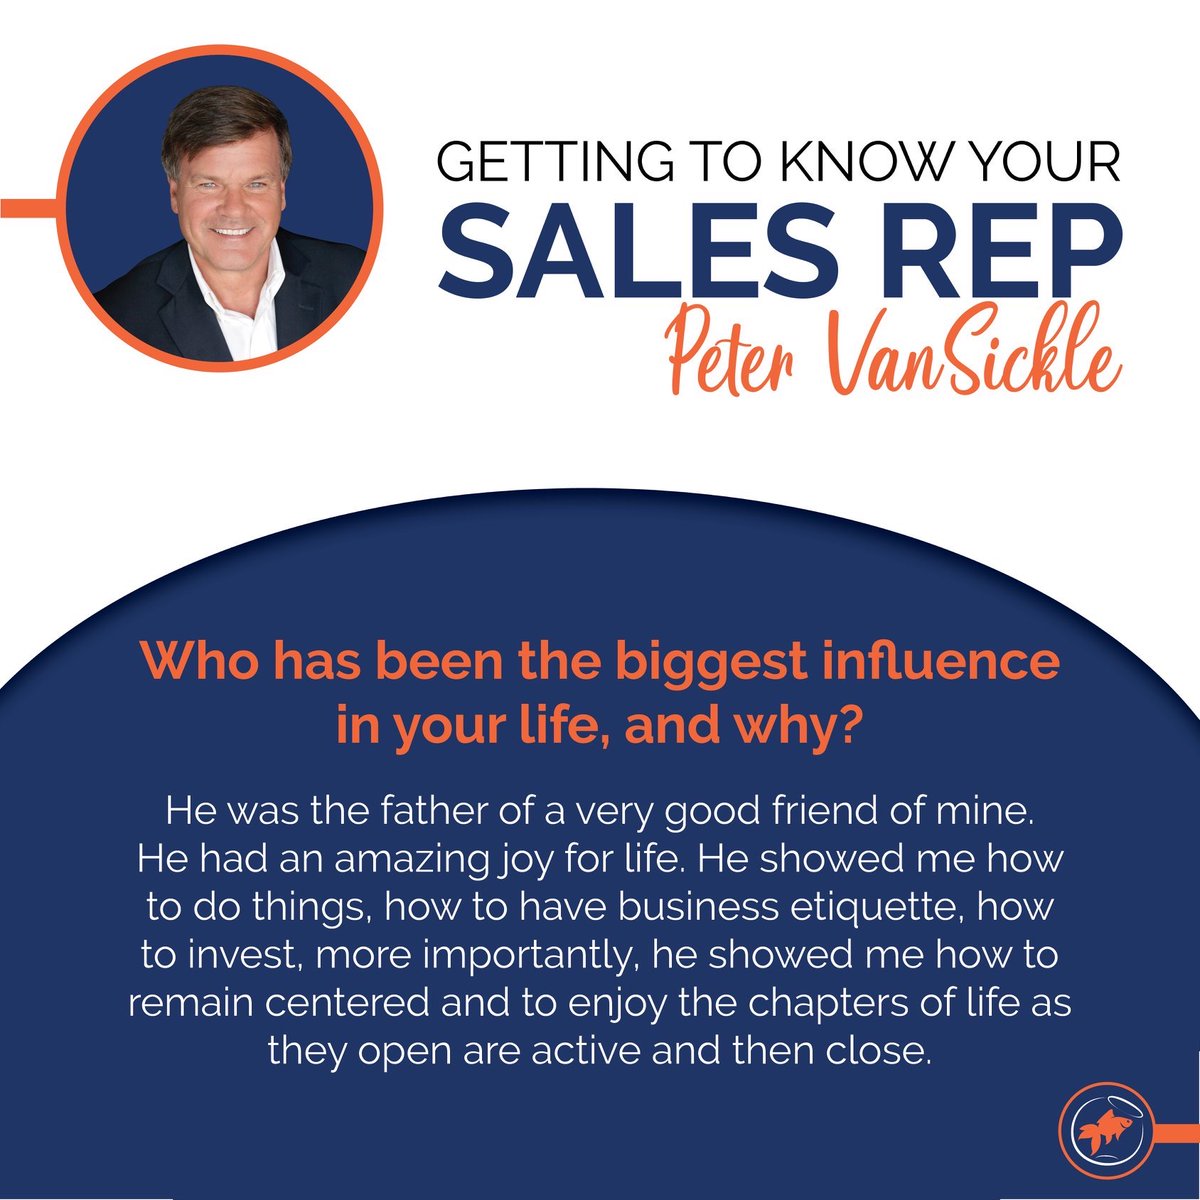 Getting to know your sales representative, Peter!

#realestate #salesrep #buyingahome #sellingahome #listingyourhome